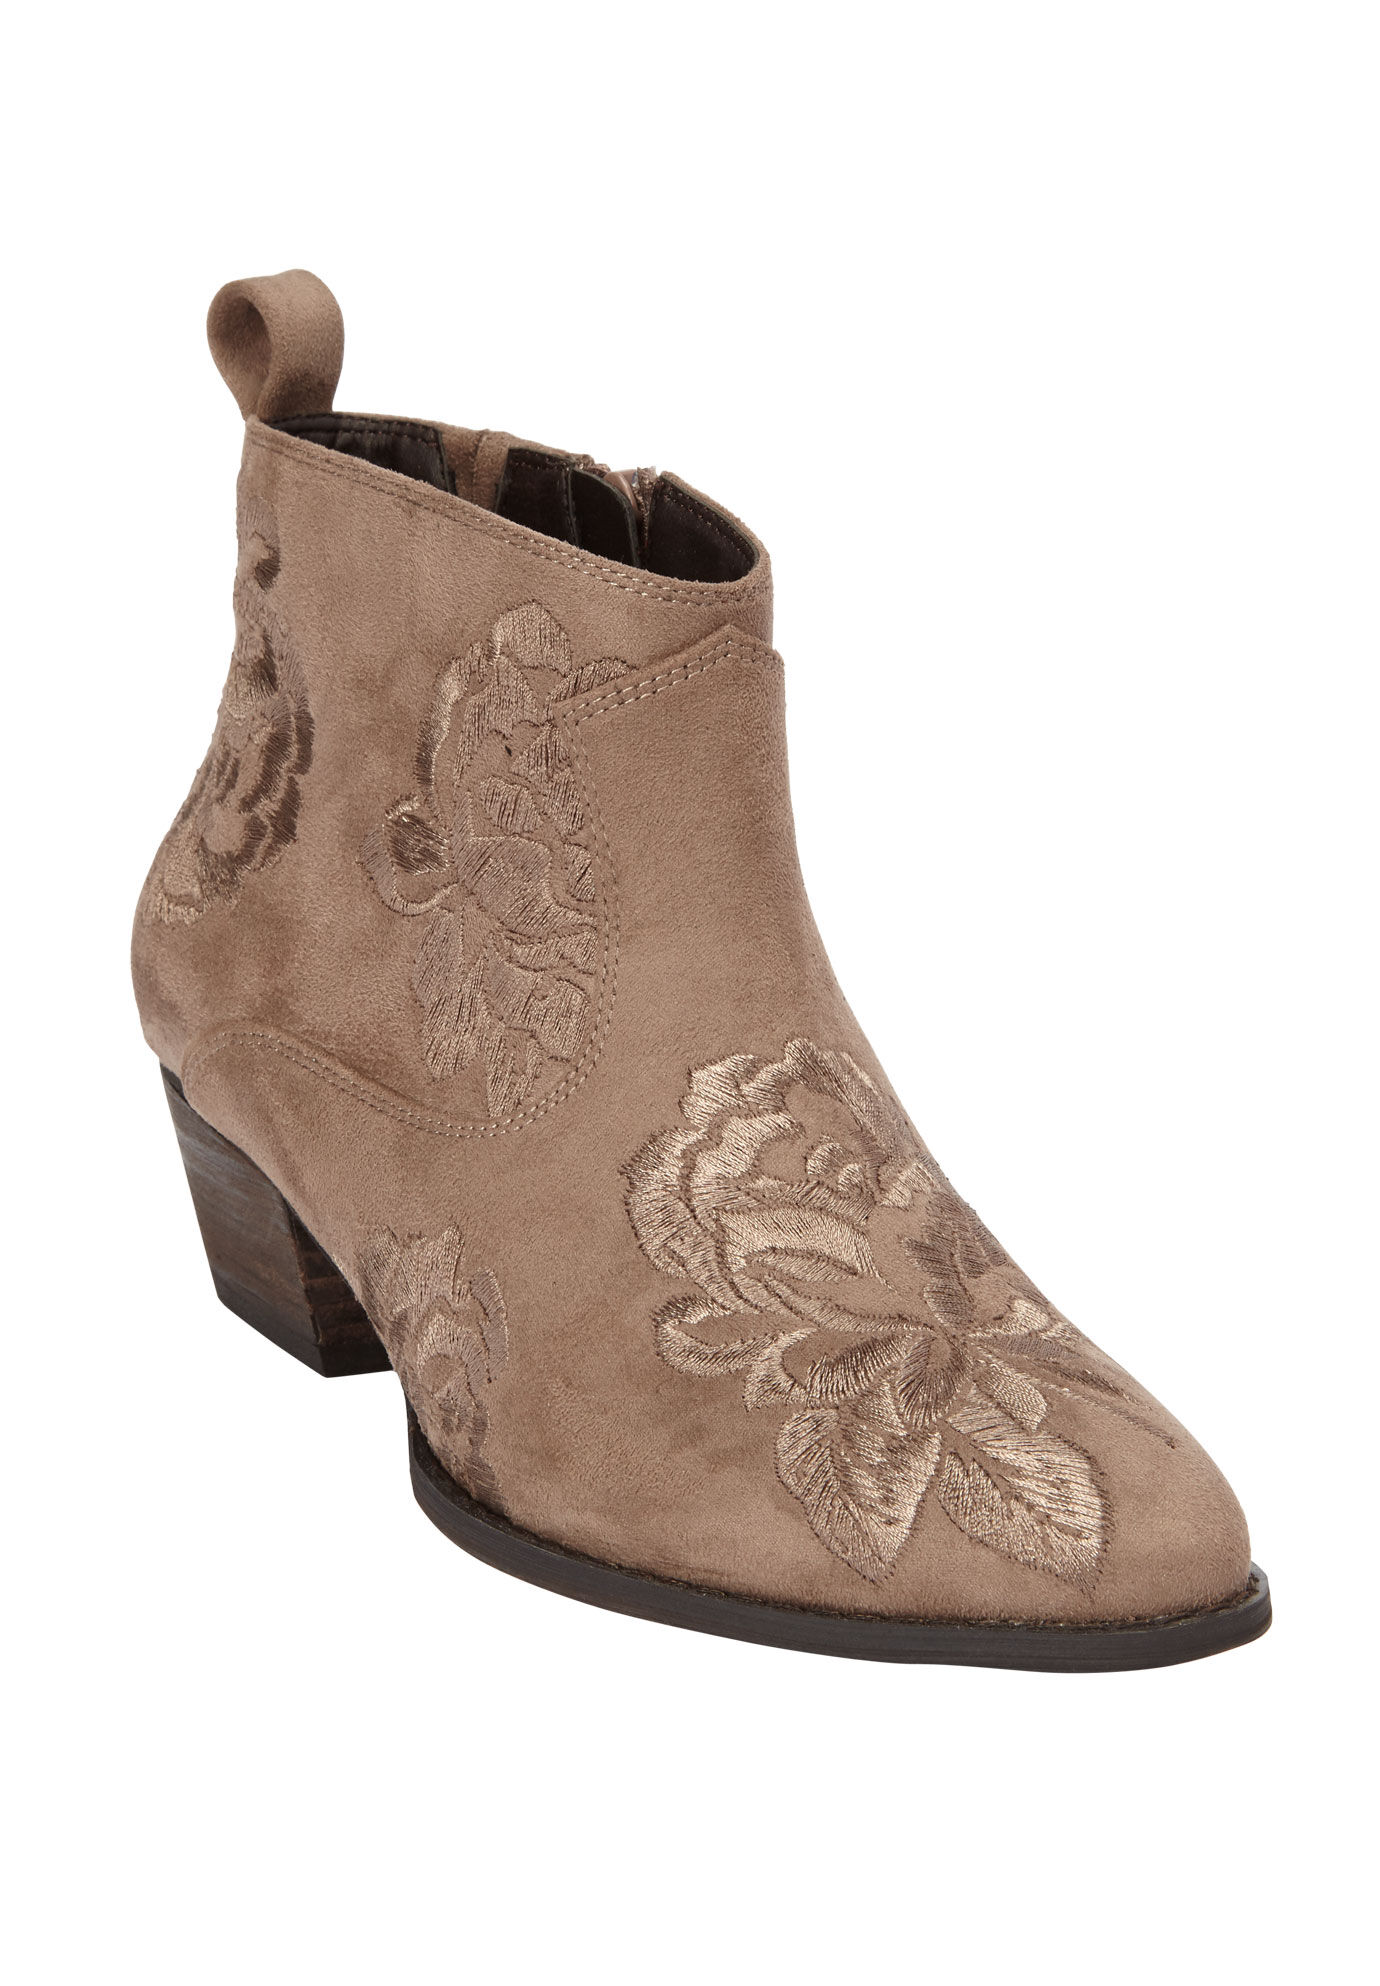 The Gwyneth Bootie by Comfortview 